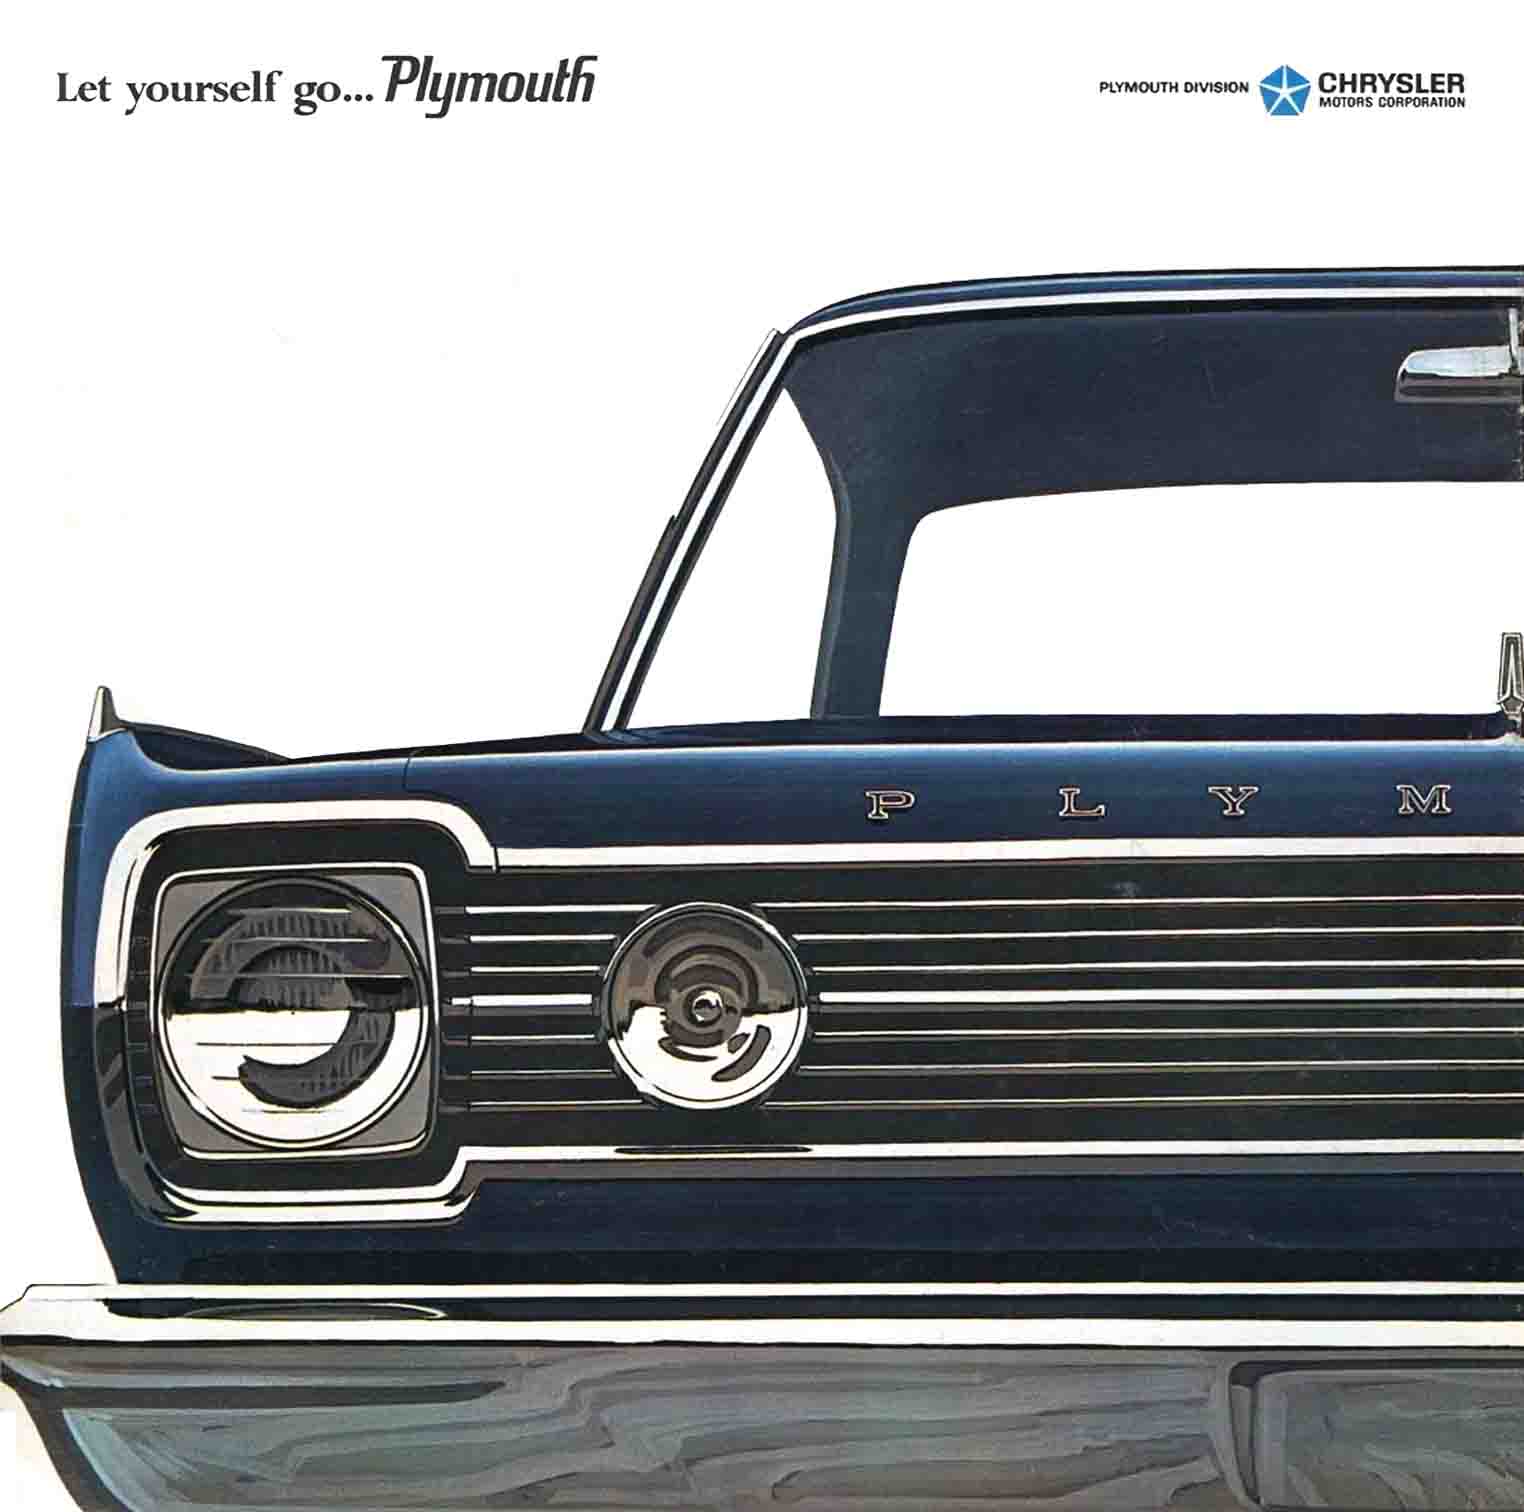 1966_Plymouth_Belvedere-16